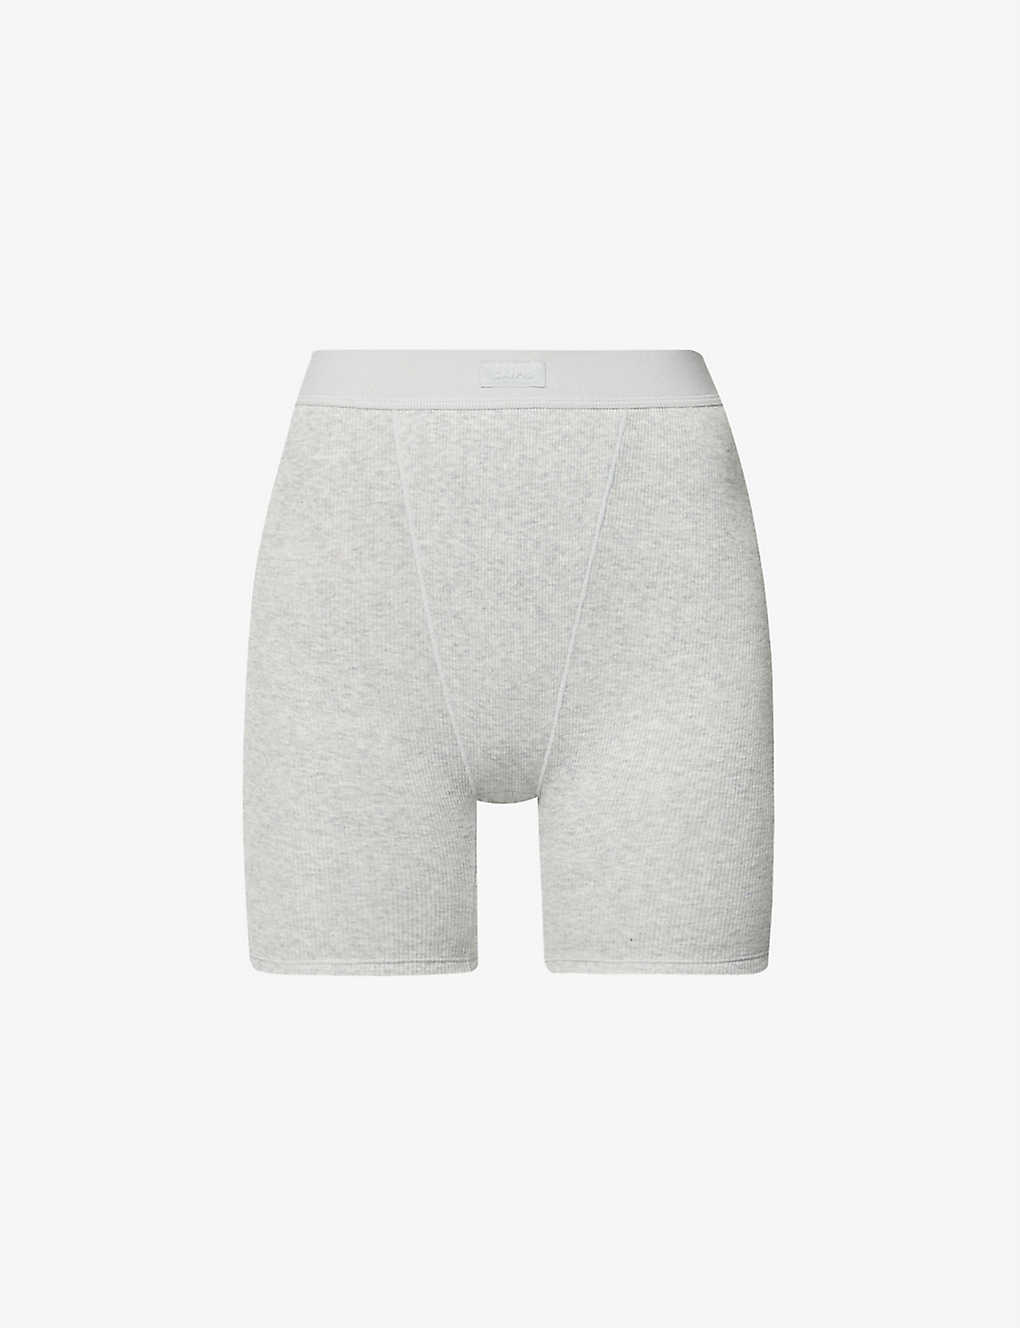 Shop Skims Women's Light Heather Grey Ribbed High-rise Stretch-cotton Boxer Shorts